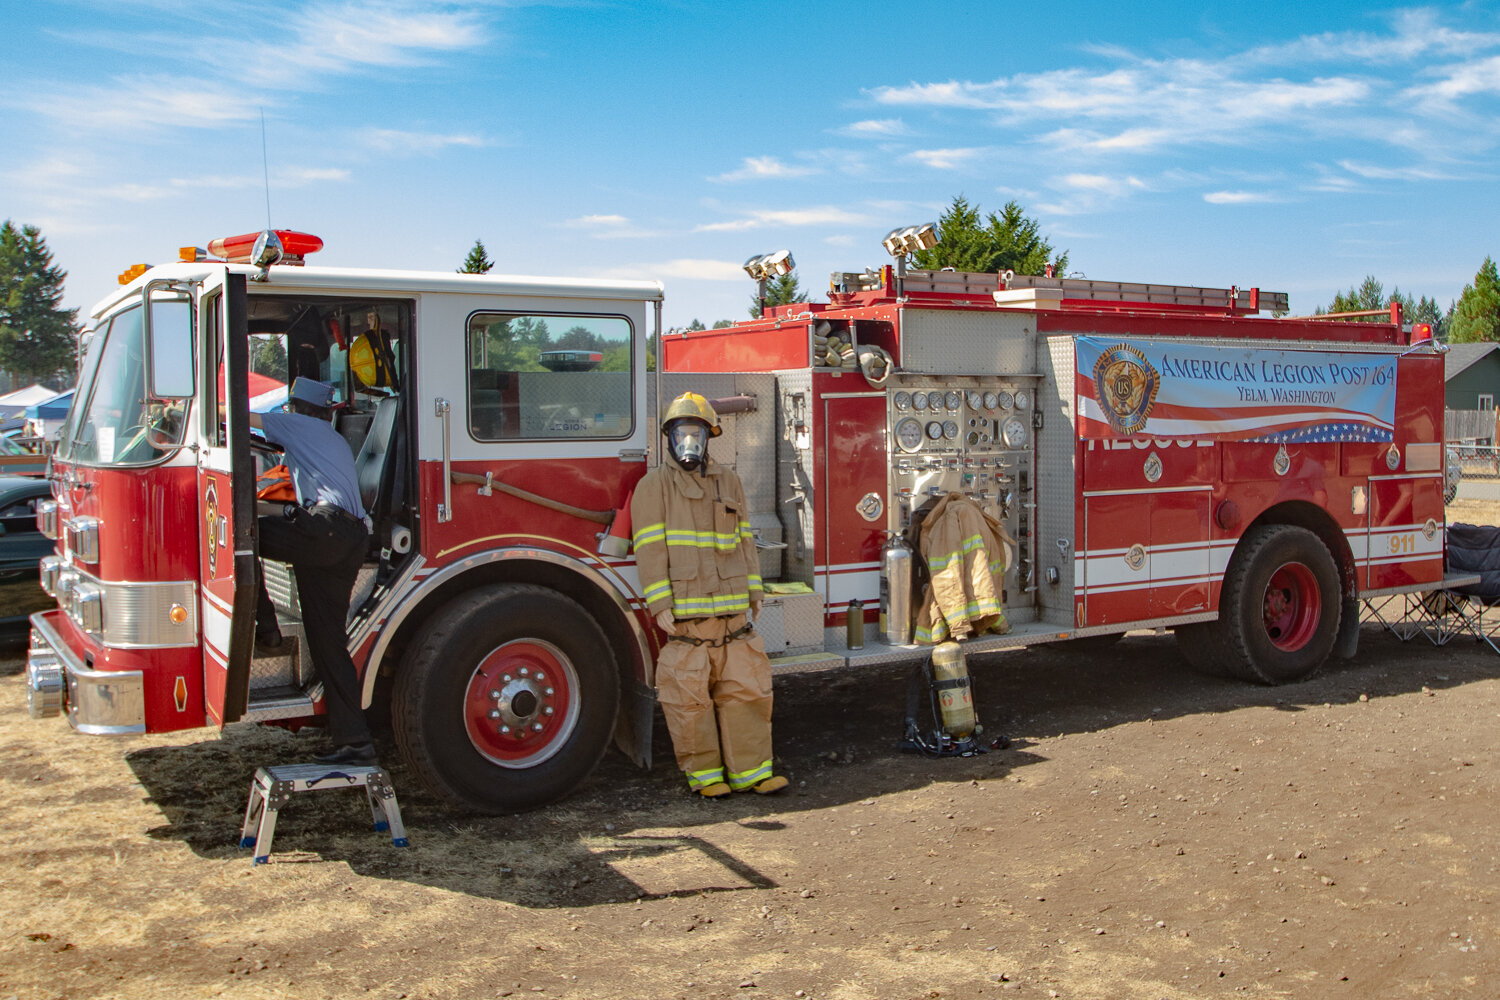 A car show attendee gets into the cab of George Gendron of Roy’s 1990 Pierce fire truck on Saturday, Sept. 2, at the 16th annual Military Heroes Car Show in Rainier at Wilkowski Park.